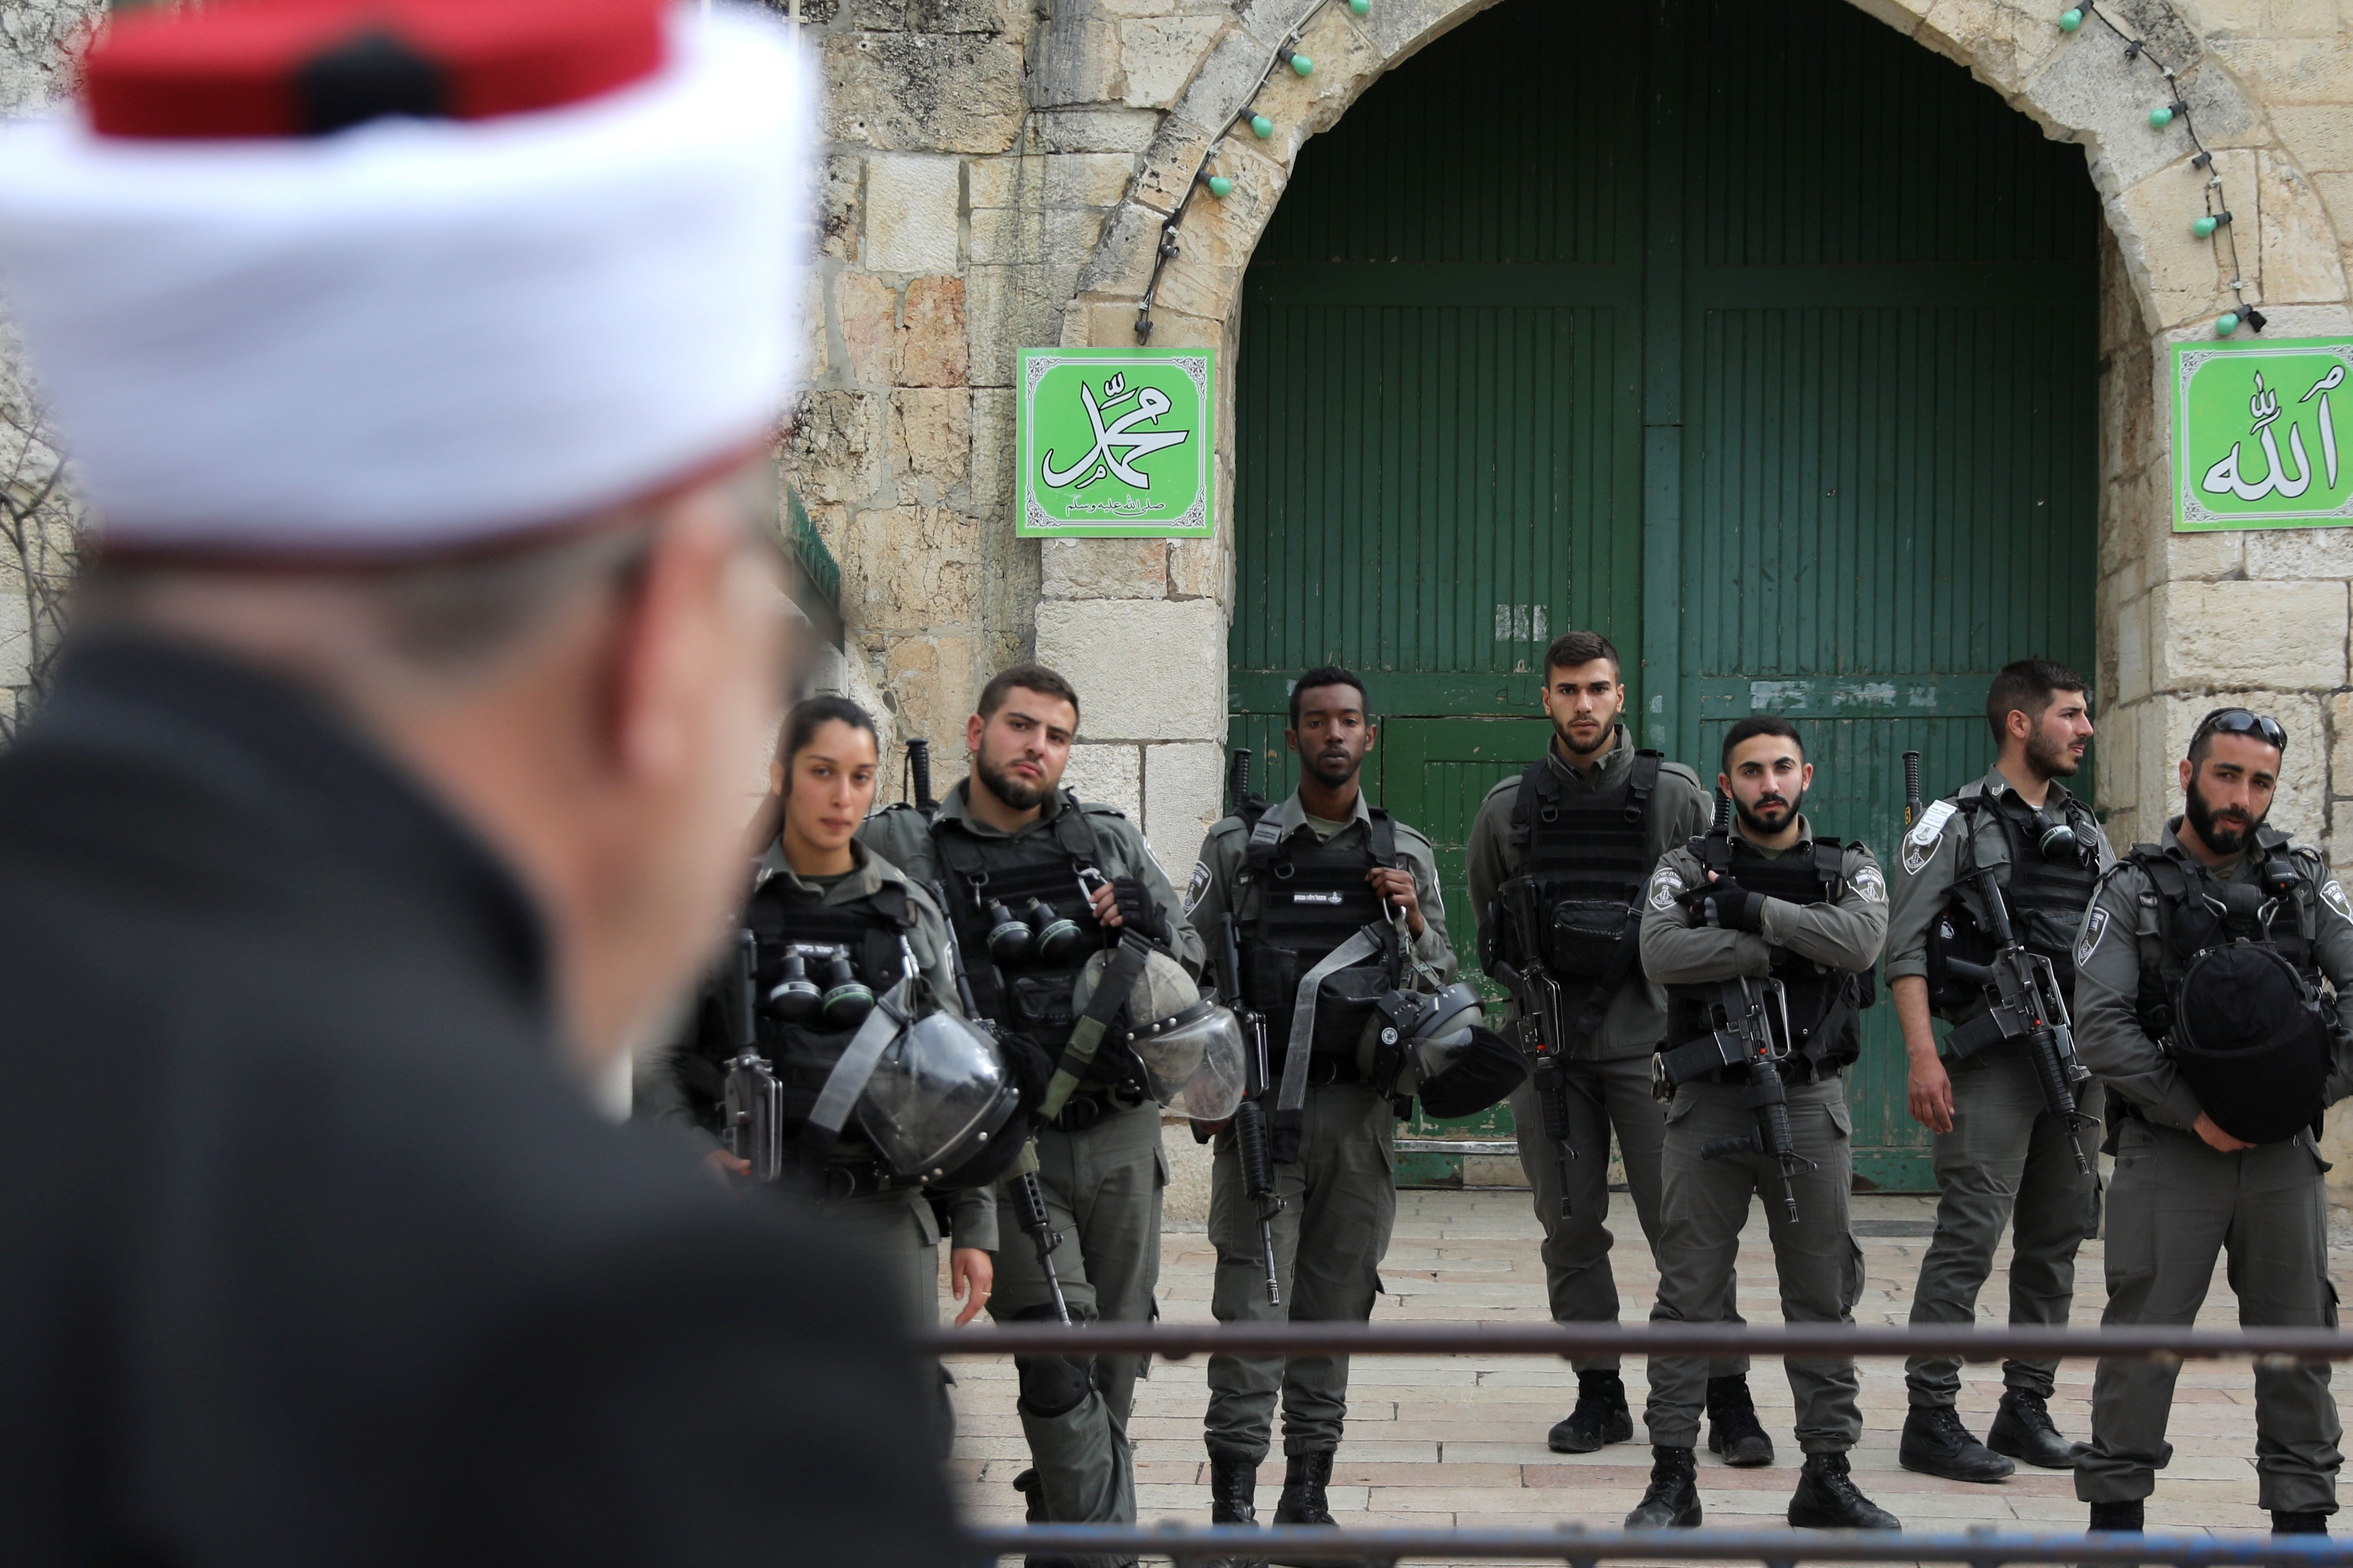 Israeli border police stand guard near the entrance door leading to the compound housing al-Aqsa Mosque in Jerusalem's Old City March 12, 2019. REUTERS